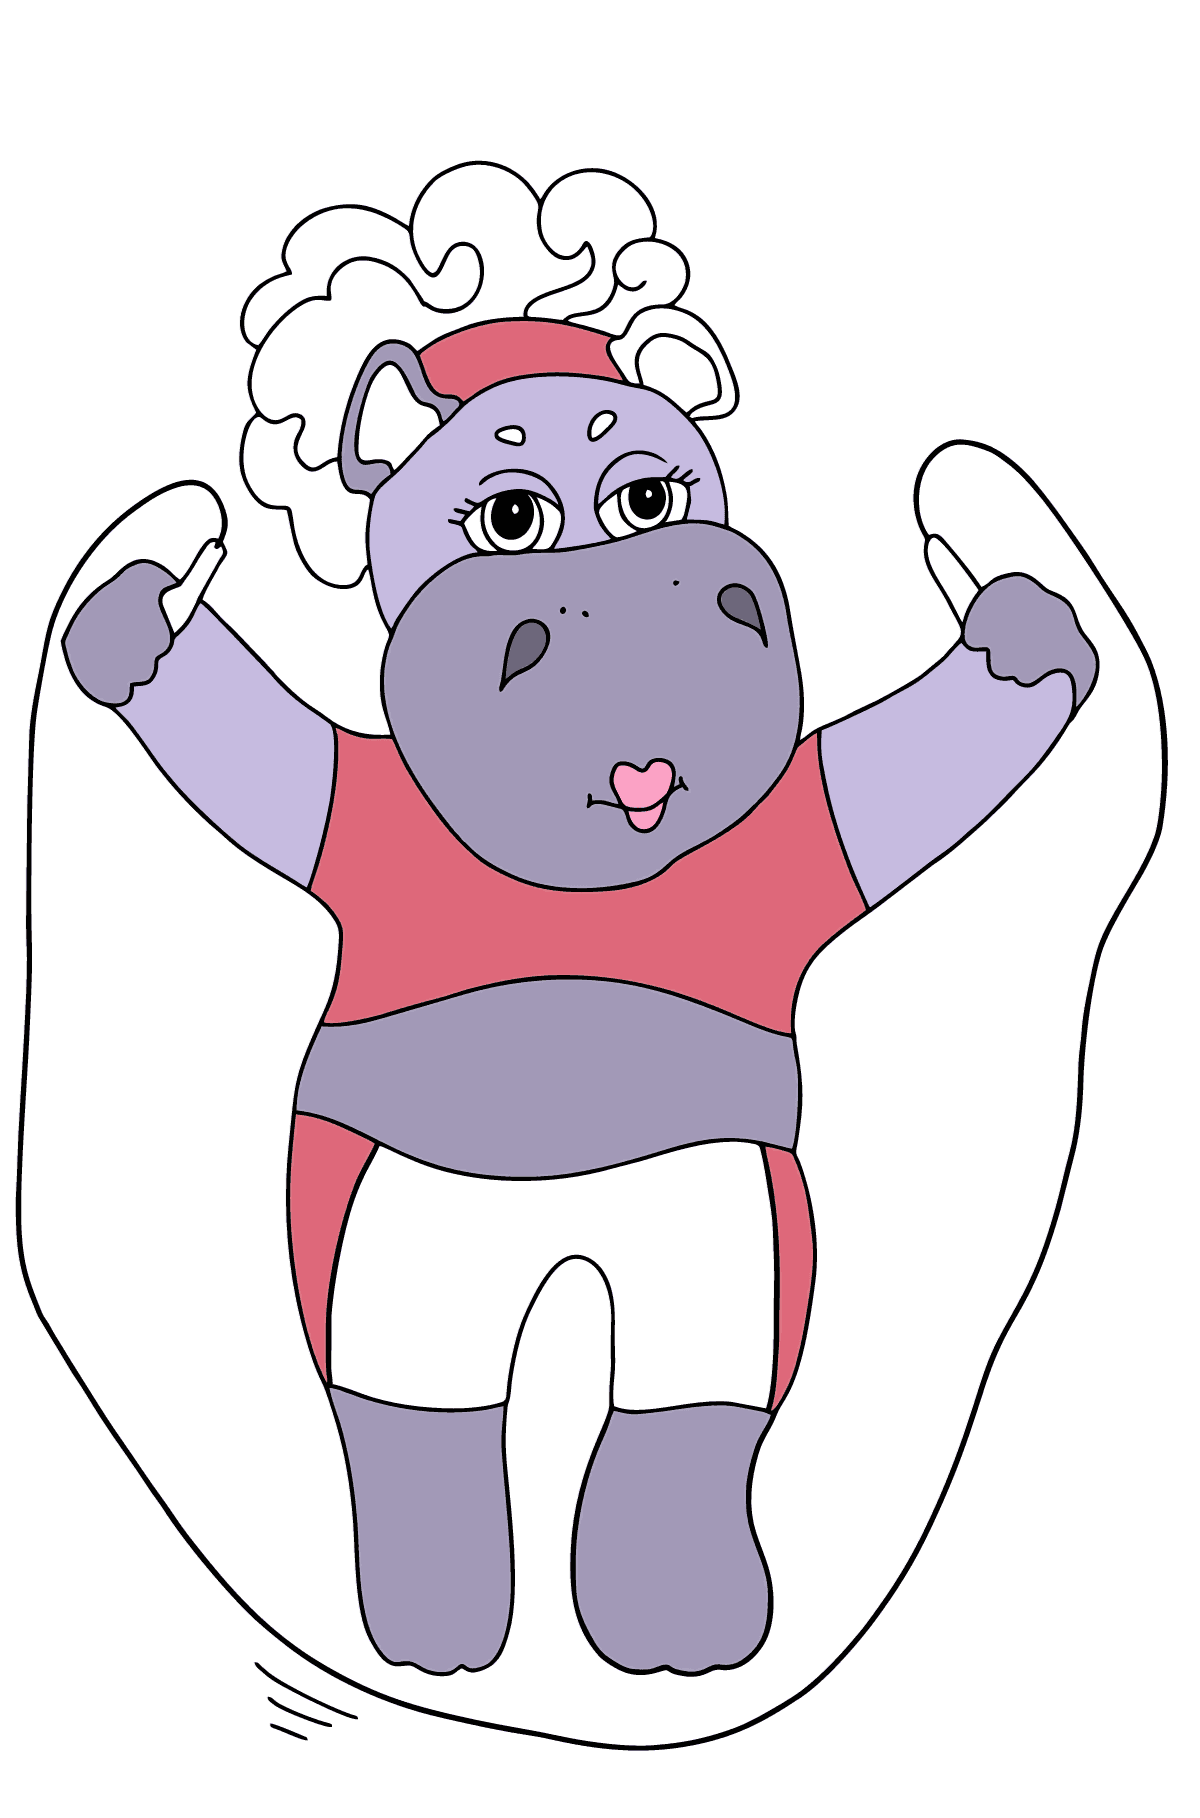 Cheerful Hippopotam (simple) coloring page - Coloring Pages for Kids